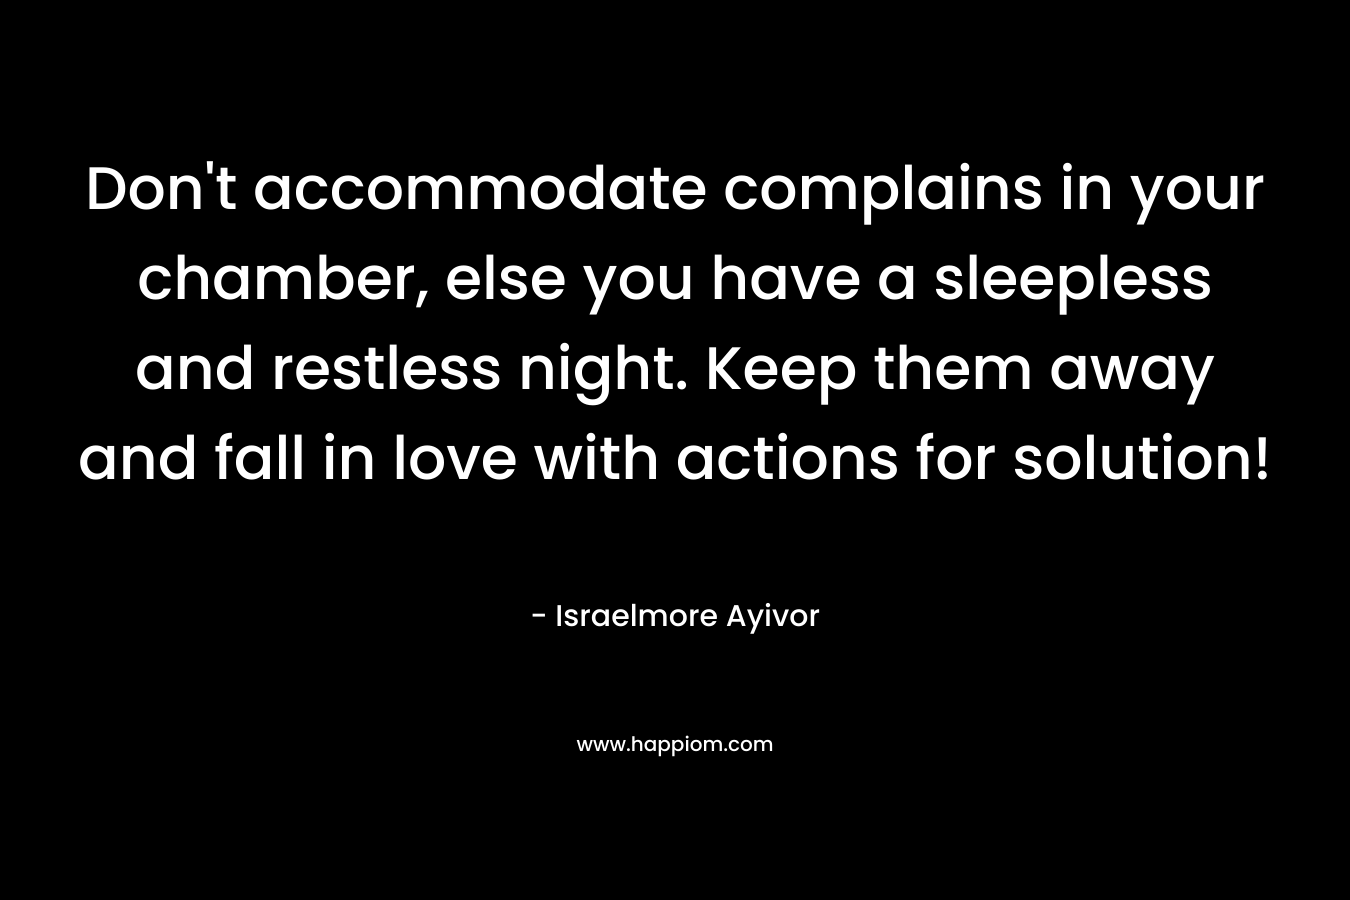 Don’t accommodate complains in your chamber, else you have a sleepless and restless night. Keep them away and fall in love with actions for solution! – Israelmore Ayivor